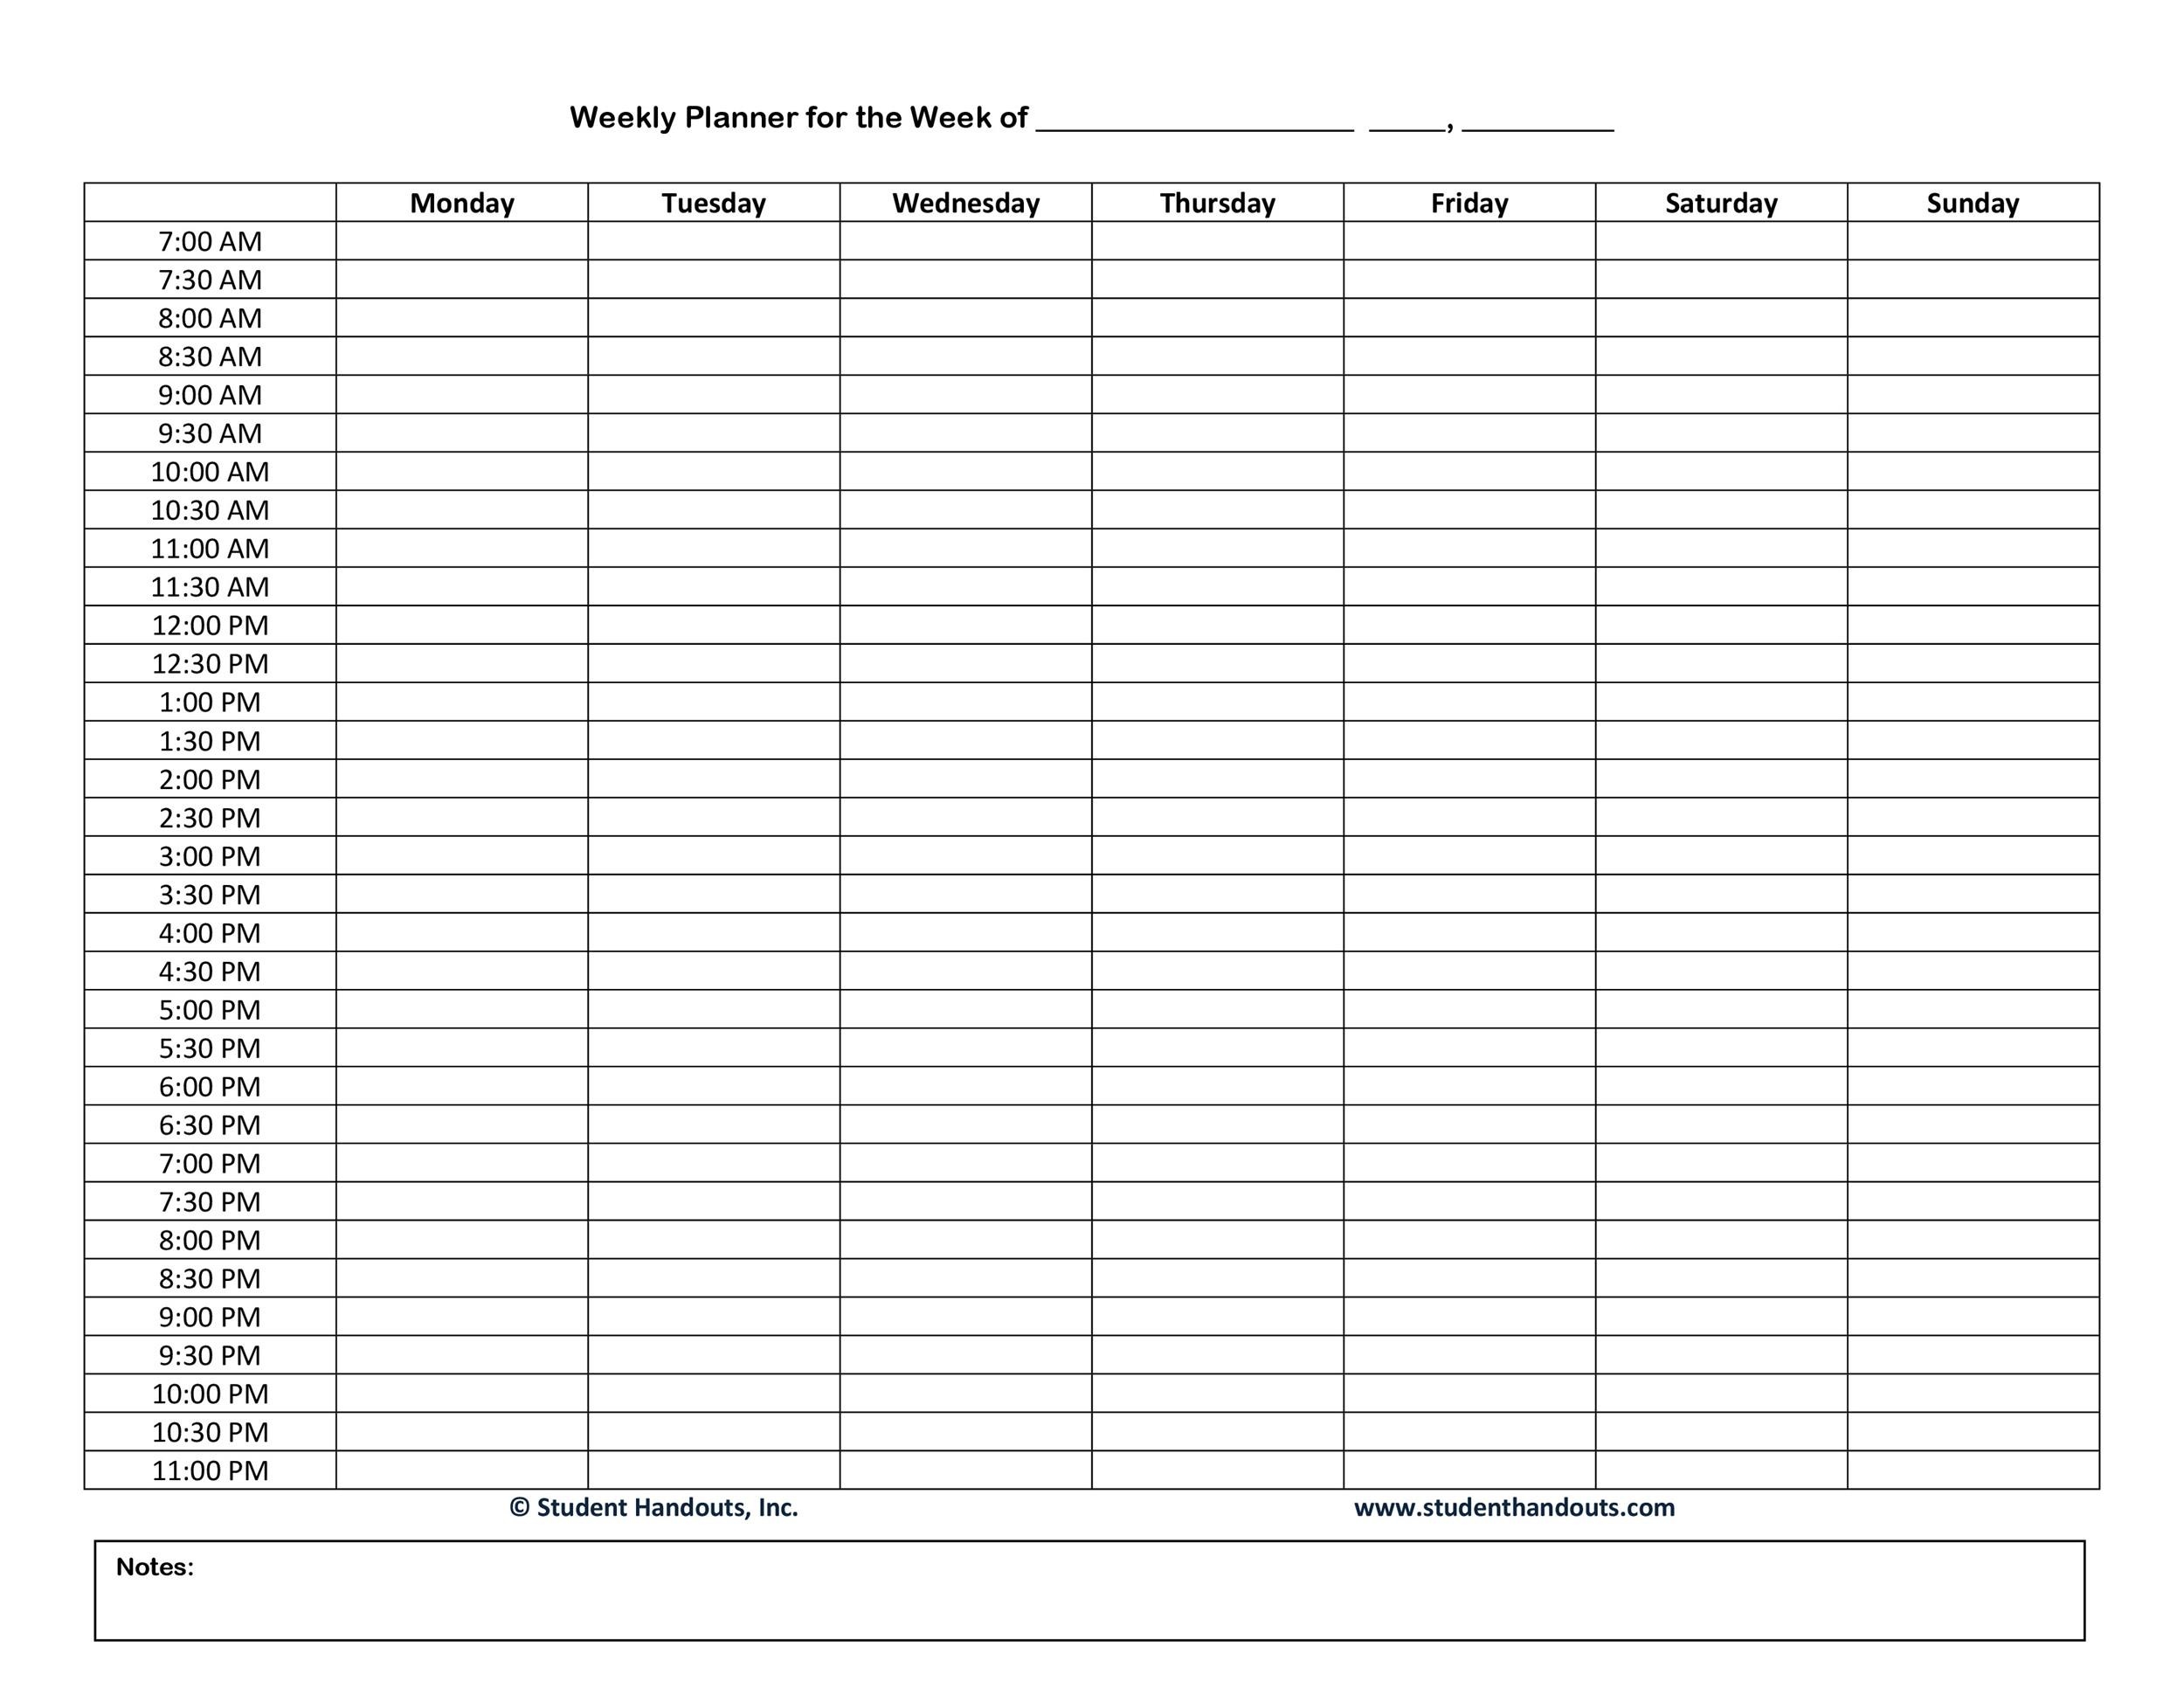 47 Printable Daily Planner Templates (Free In Word/Excel/Pdf)  7 Day Schedule Template In Every 30 Minutes